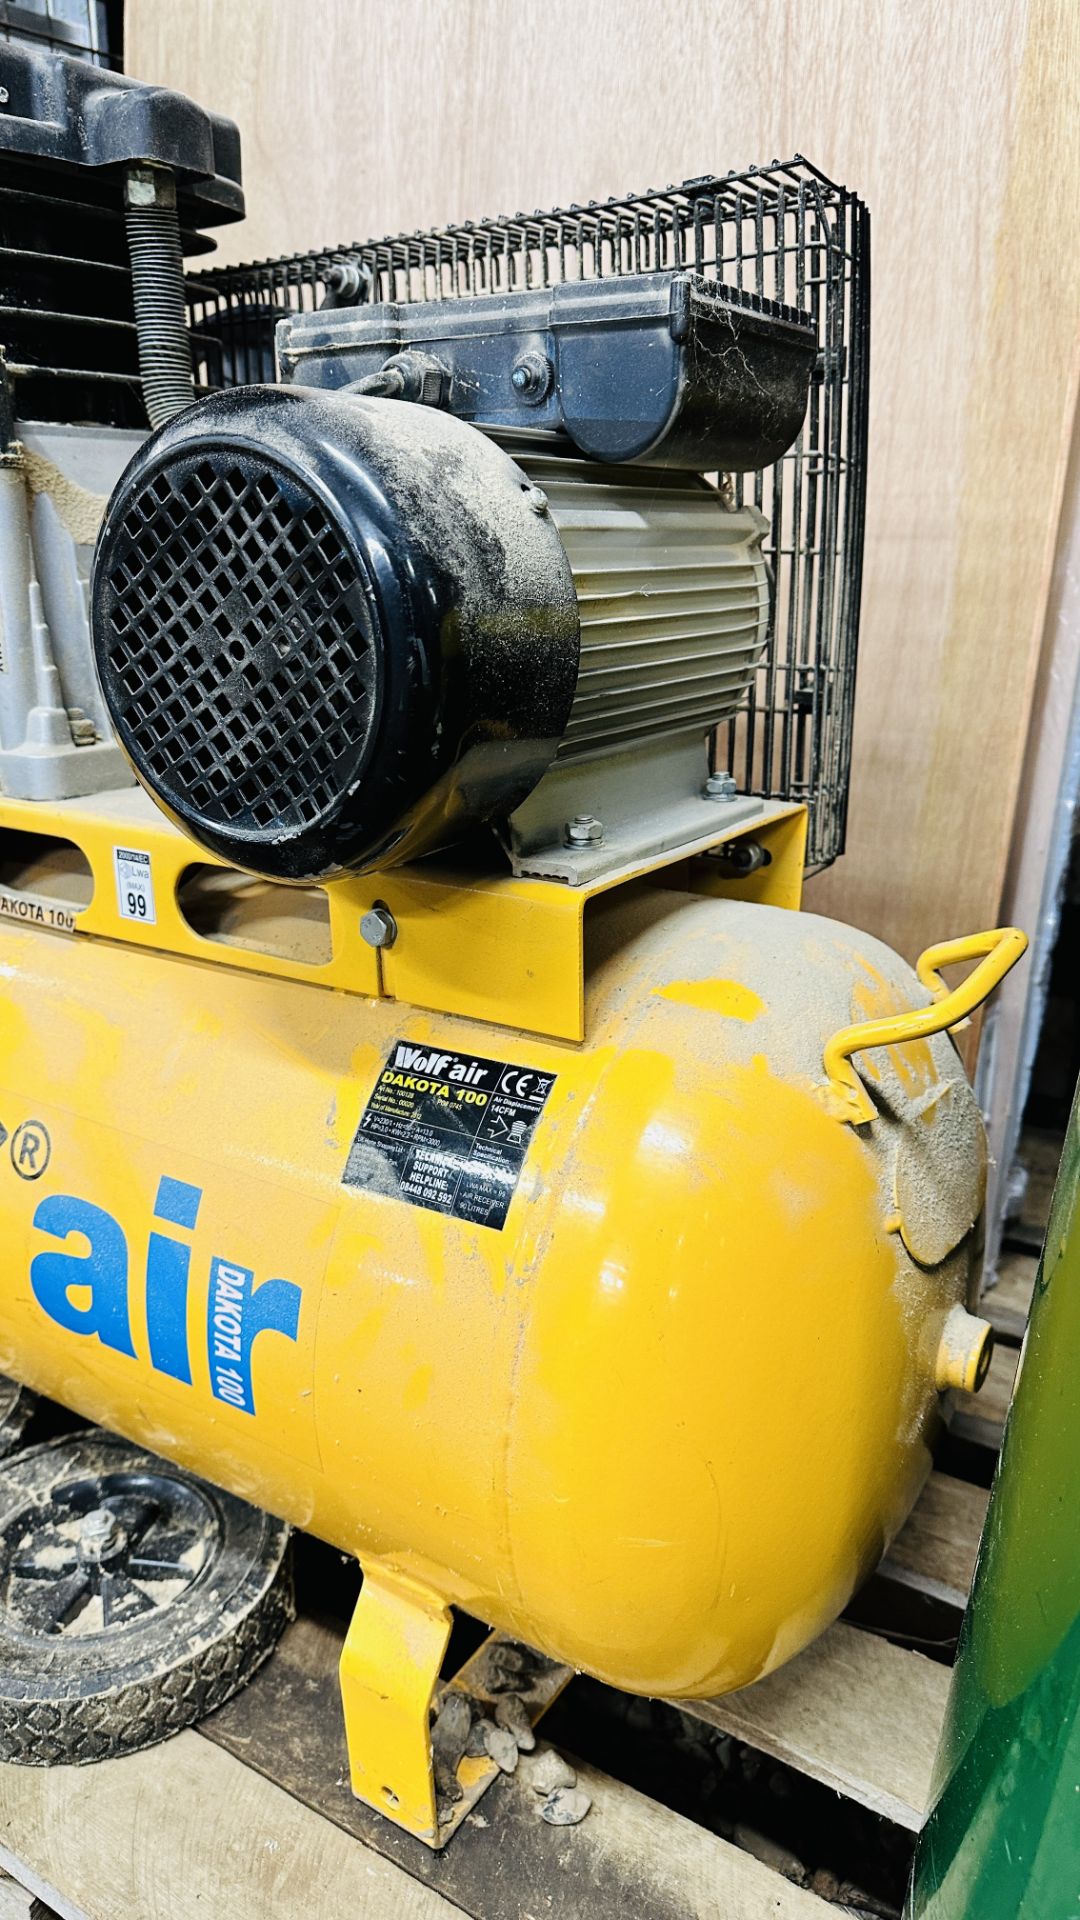 WOLF AIR DAKOTA 100 COMMERCIAL AIR COMPRESSOR, 90 LITRE TANK ALONG WITH VARIOUS HOSES. - Image 3 of 8